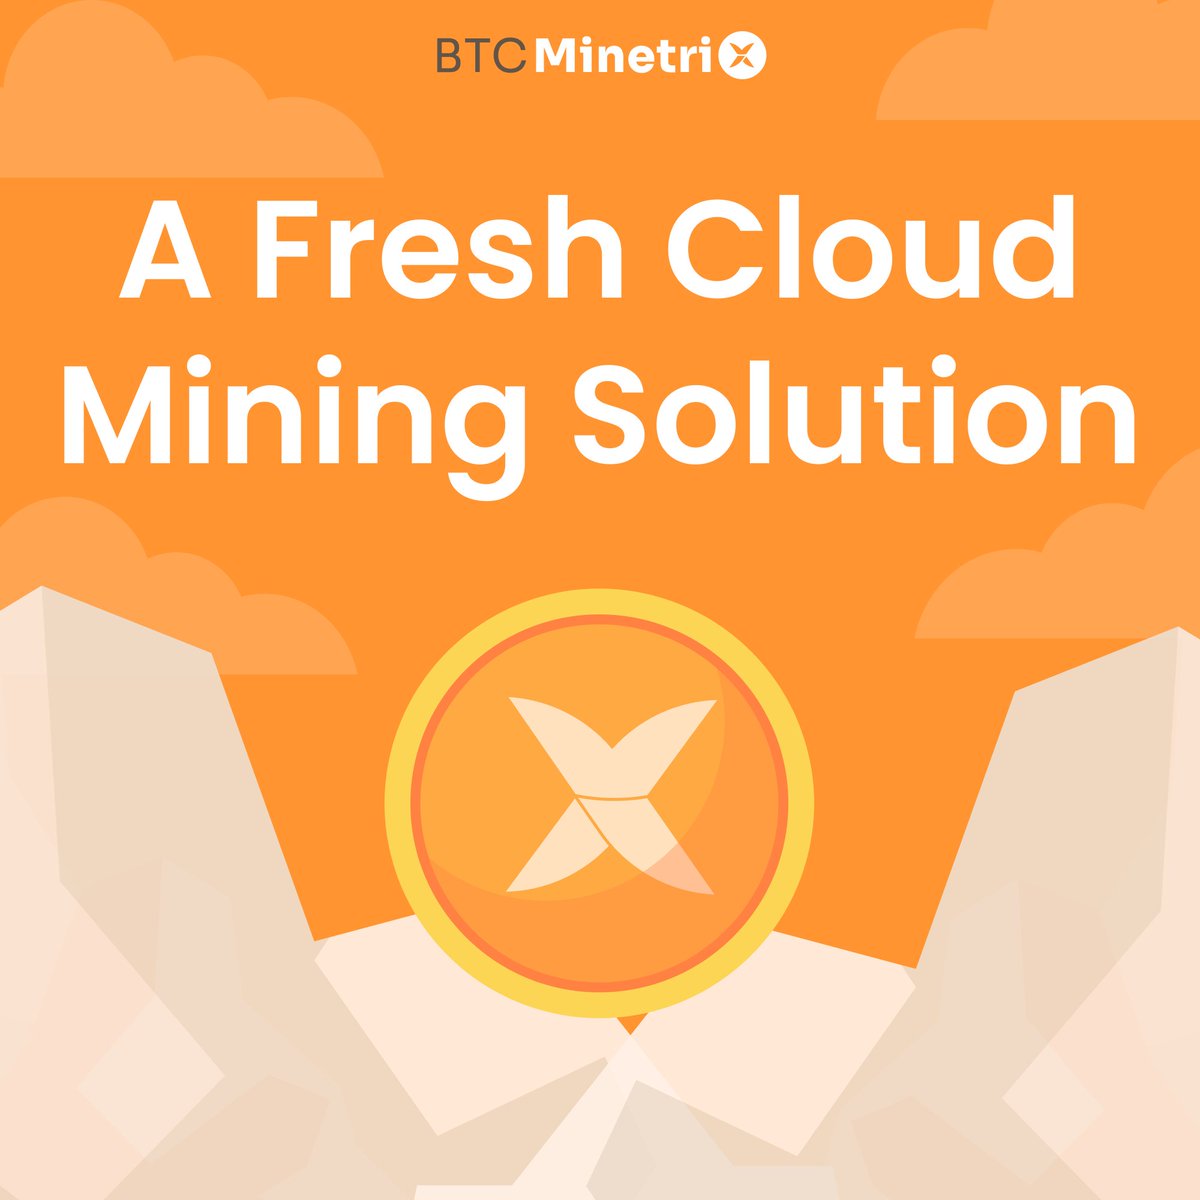 #BTCMTX presents a reliable cloud mining solution suitable. Previous worries regarding pricey equipment and dishonest cloud mining operations have discouraged numerous individuals. This decentralized approach guarantees transparency and a safe mining expedition. 🔗🛠️